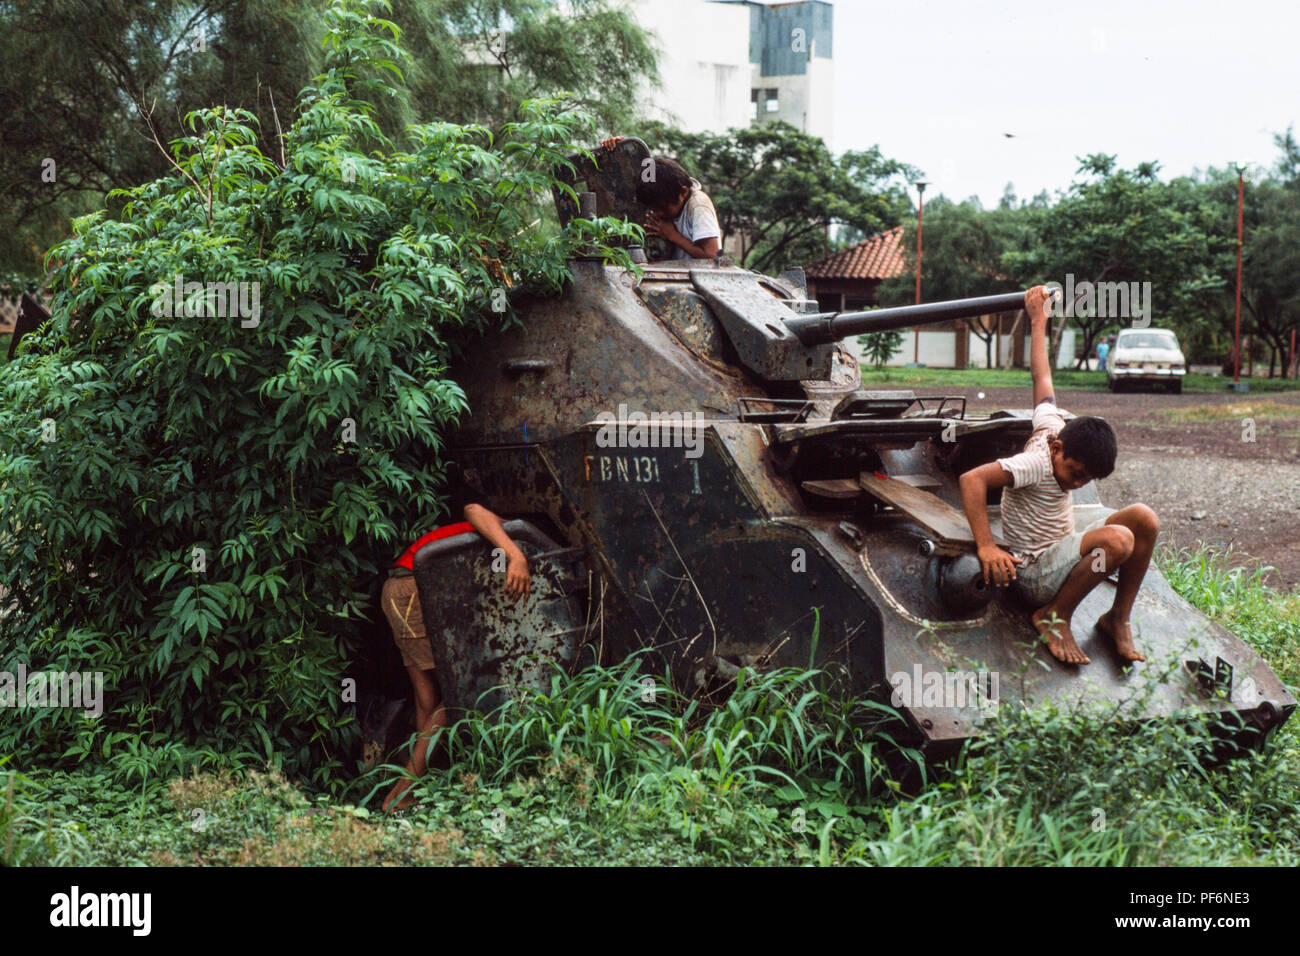 Managua, Nicaragua,  June 1986; Children play on the wrecked remains of Somoza's armoured tanks and APCs  in the centre of Managua. There were destryed by Sandinista forces in civil war against Somoza in 1979. Stock Photo